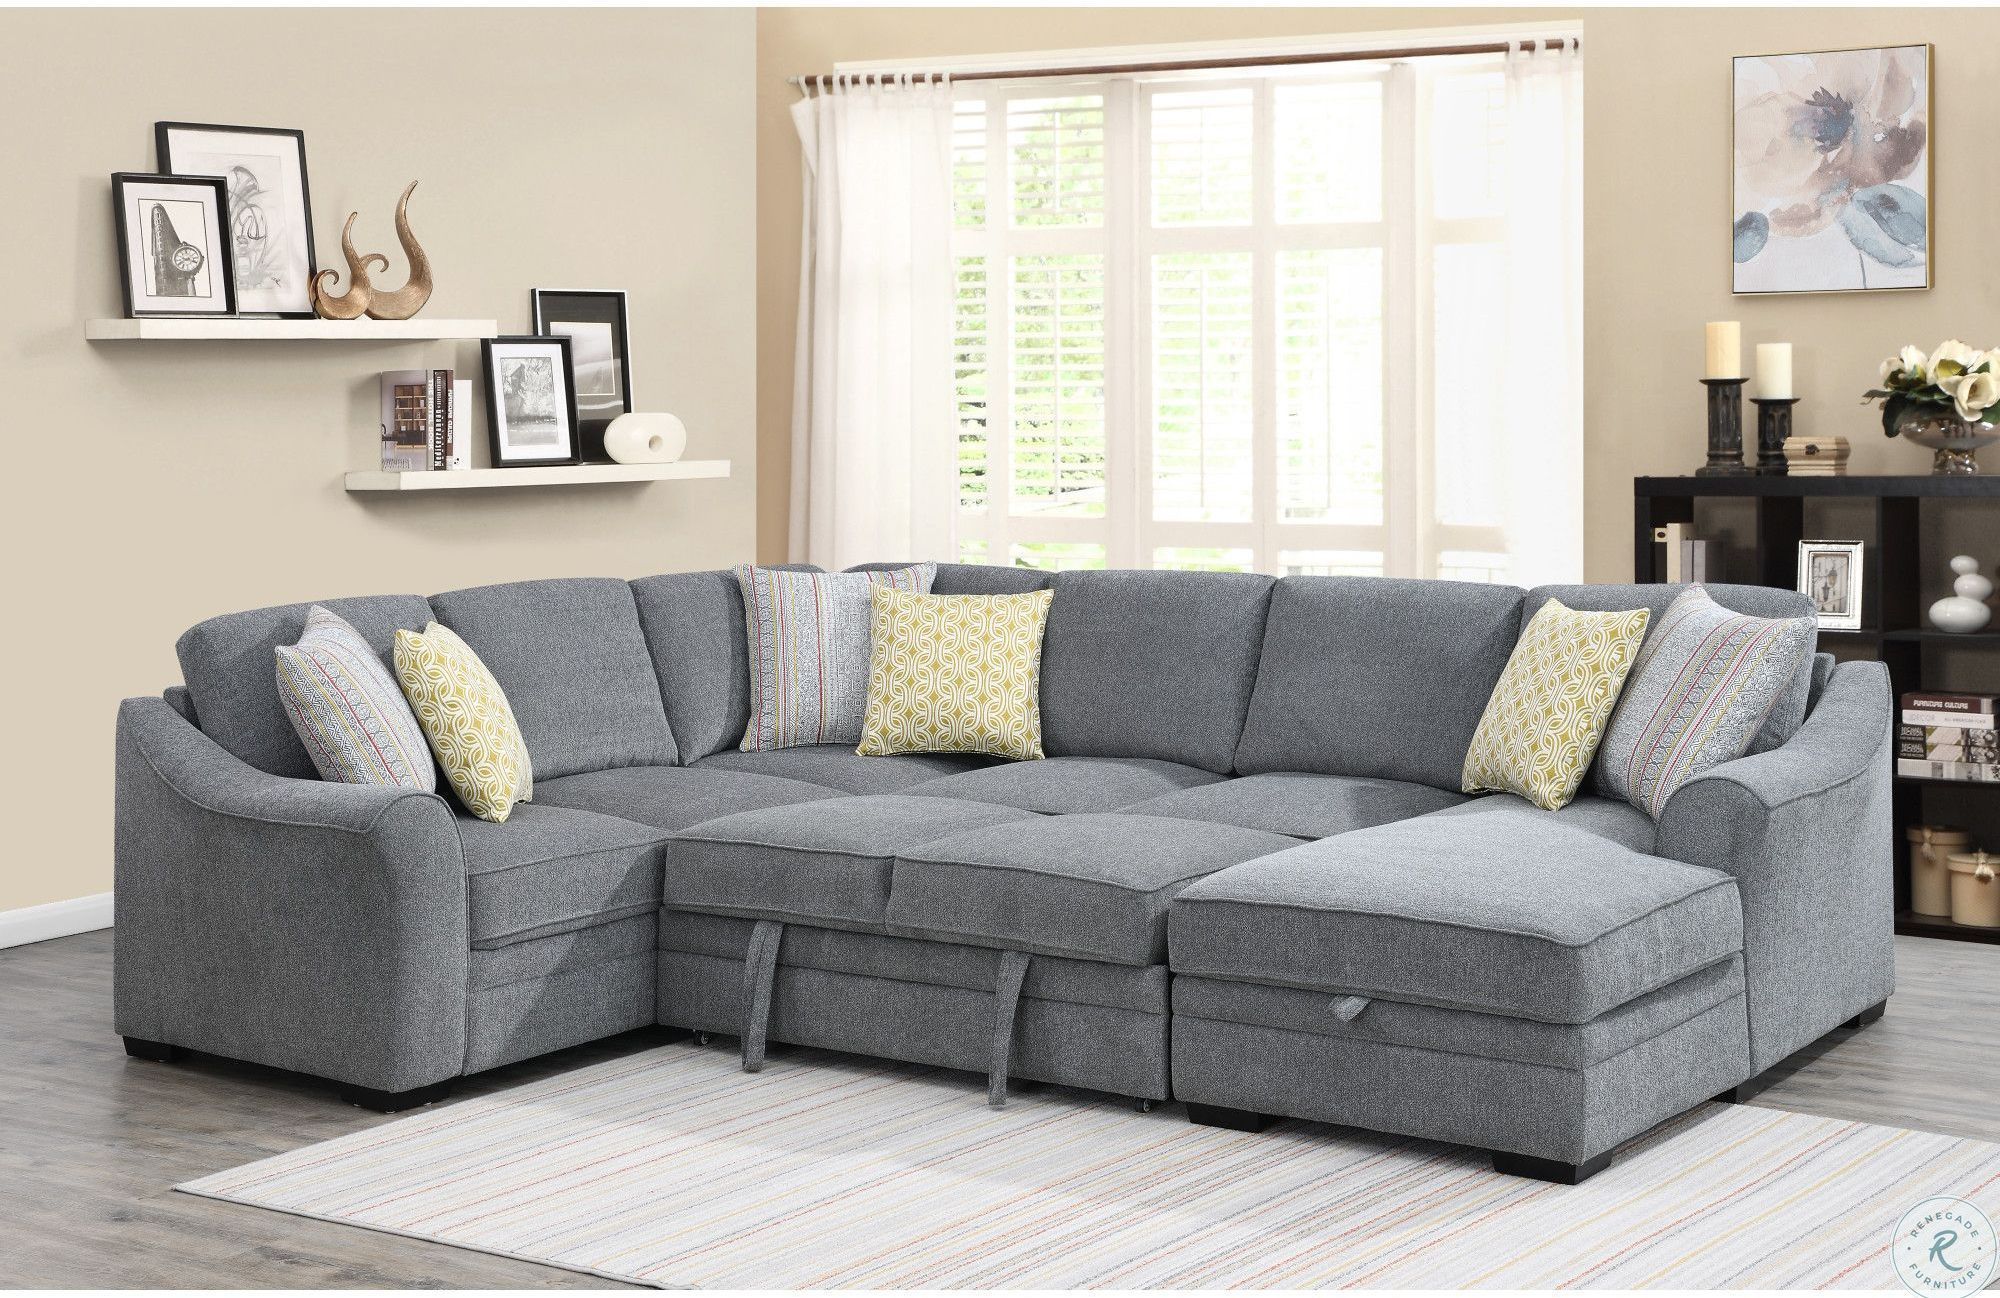 Accrington Earth Laf Sectional | Sectional Sleeper Sofa, Furniture Within Left Or Right Facing Sleeper Sectionals (Gallery 2 of 21)